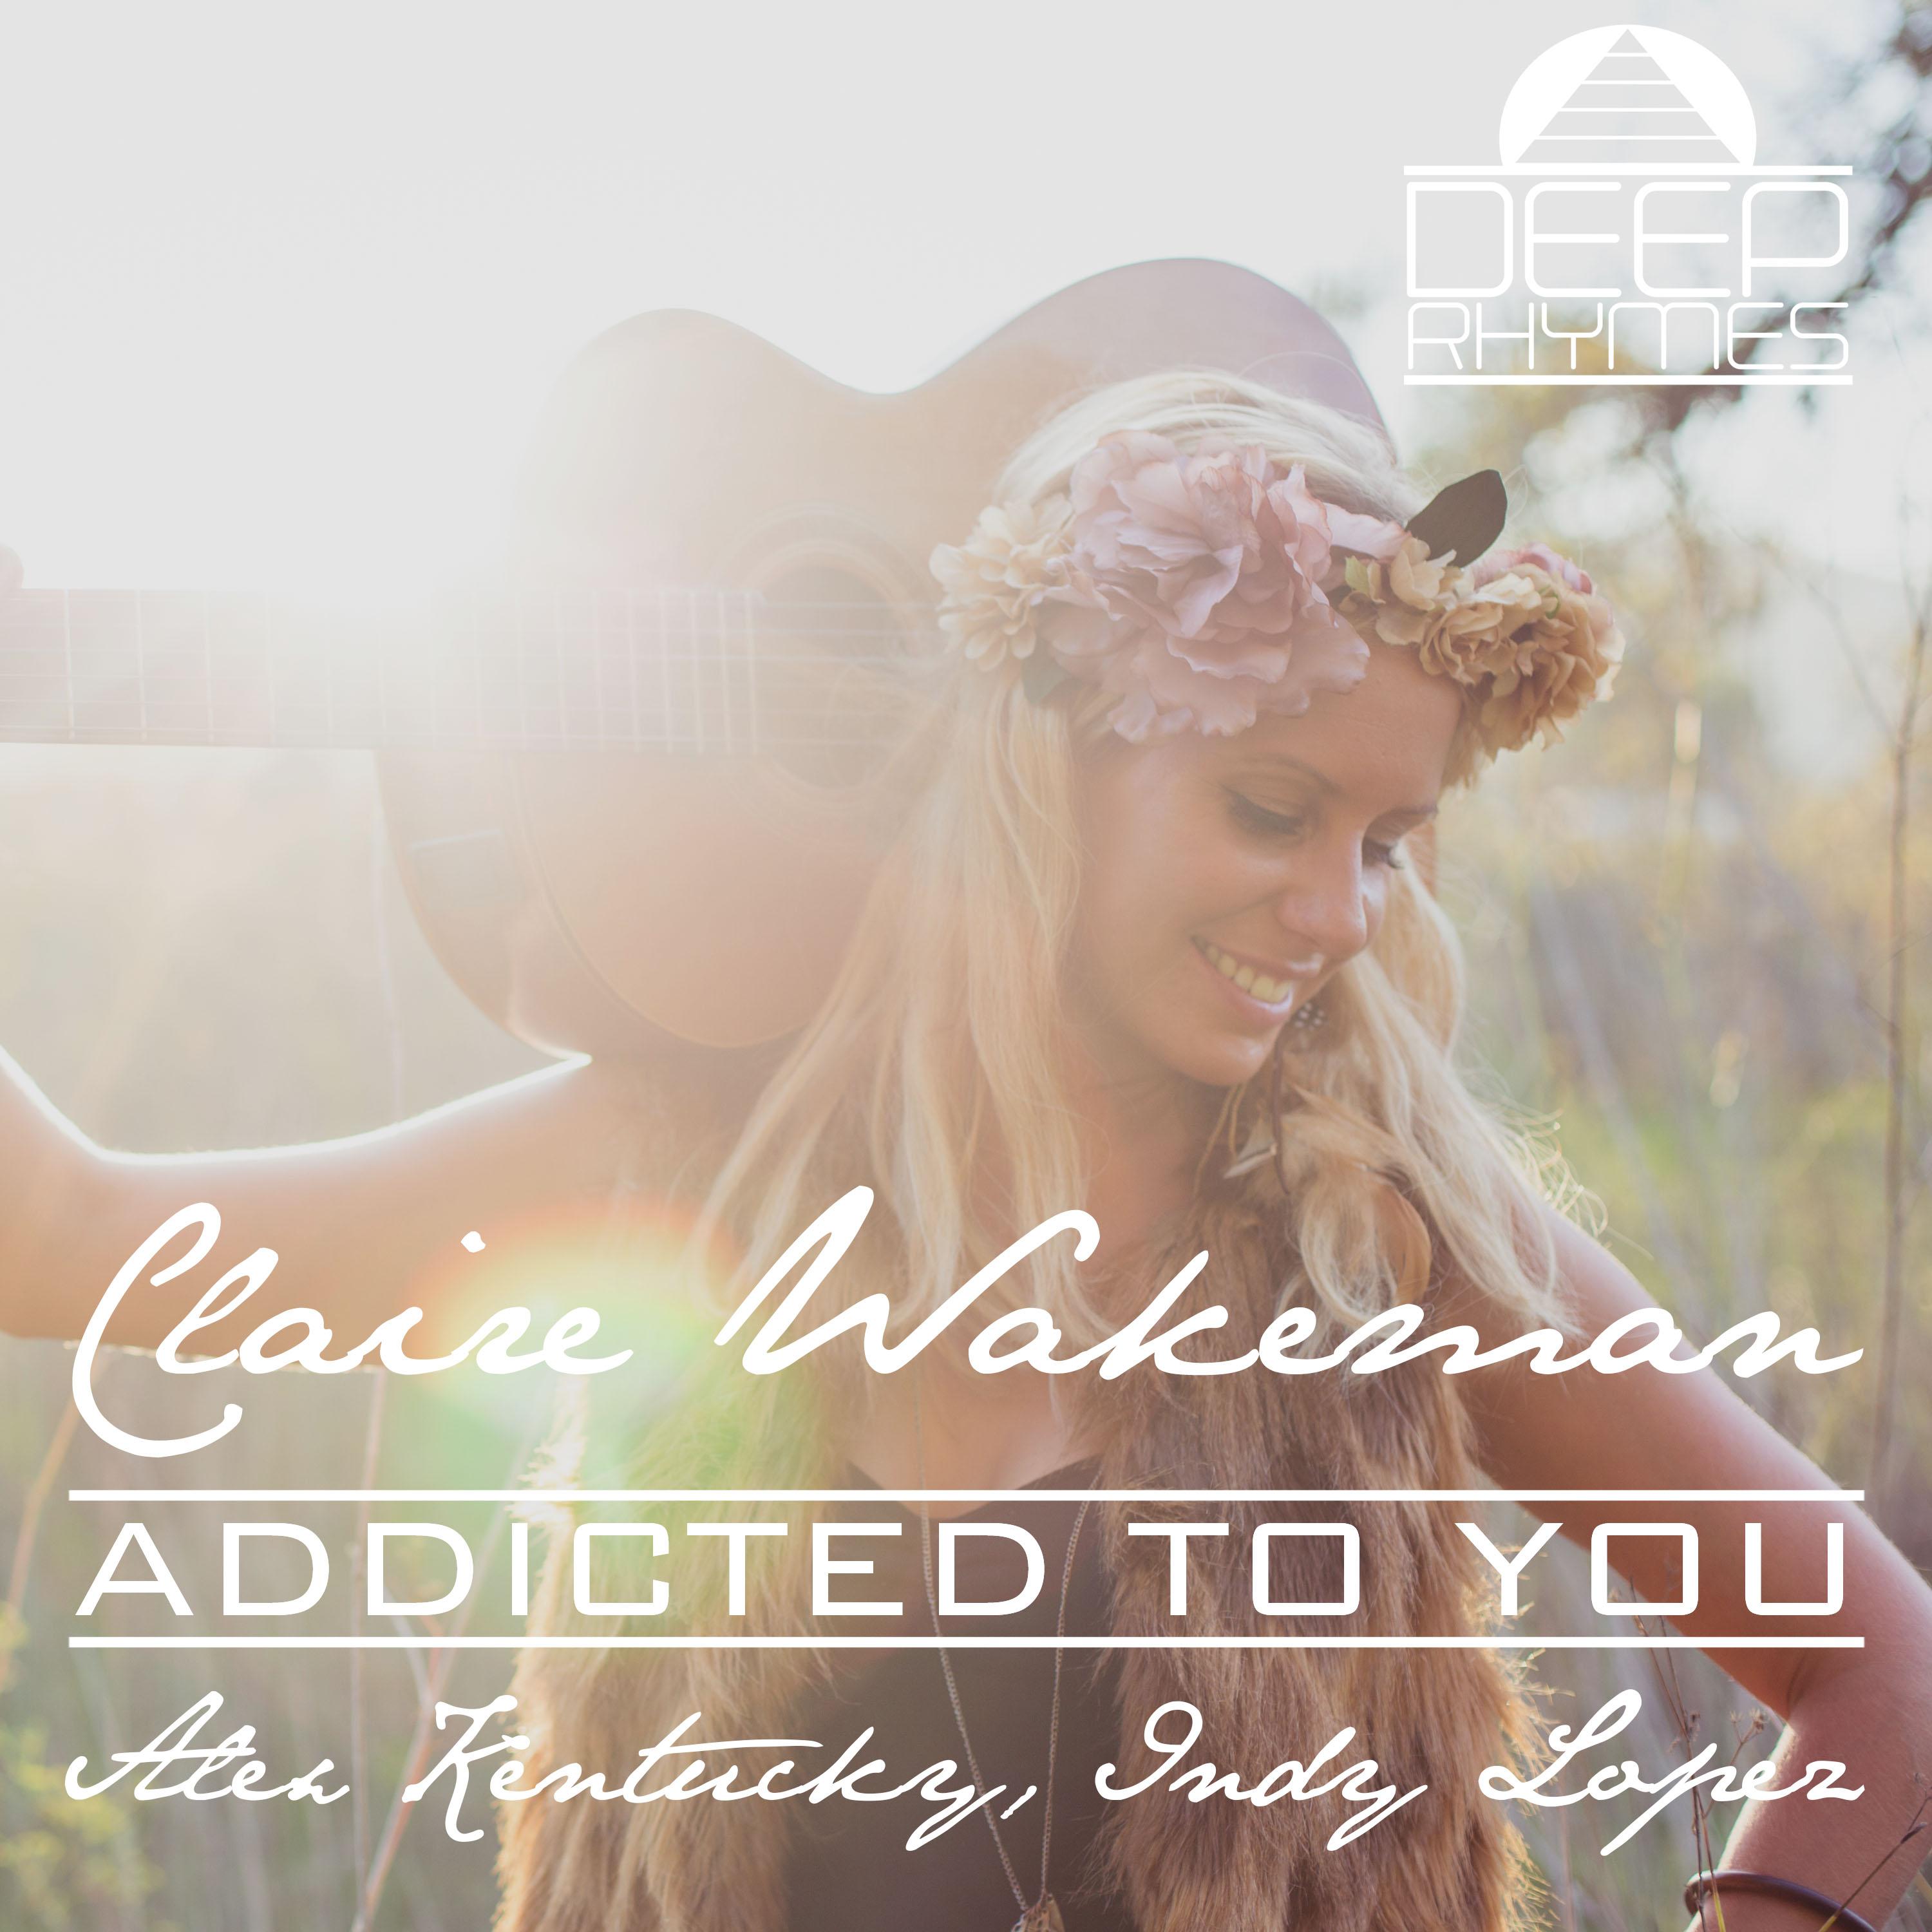 Claire Wakeman - Addicted To You (Claire Wakeman In My Room MIx)